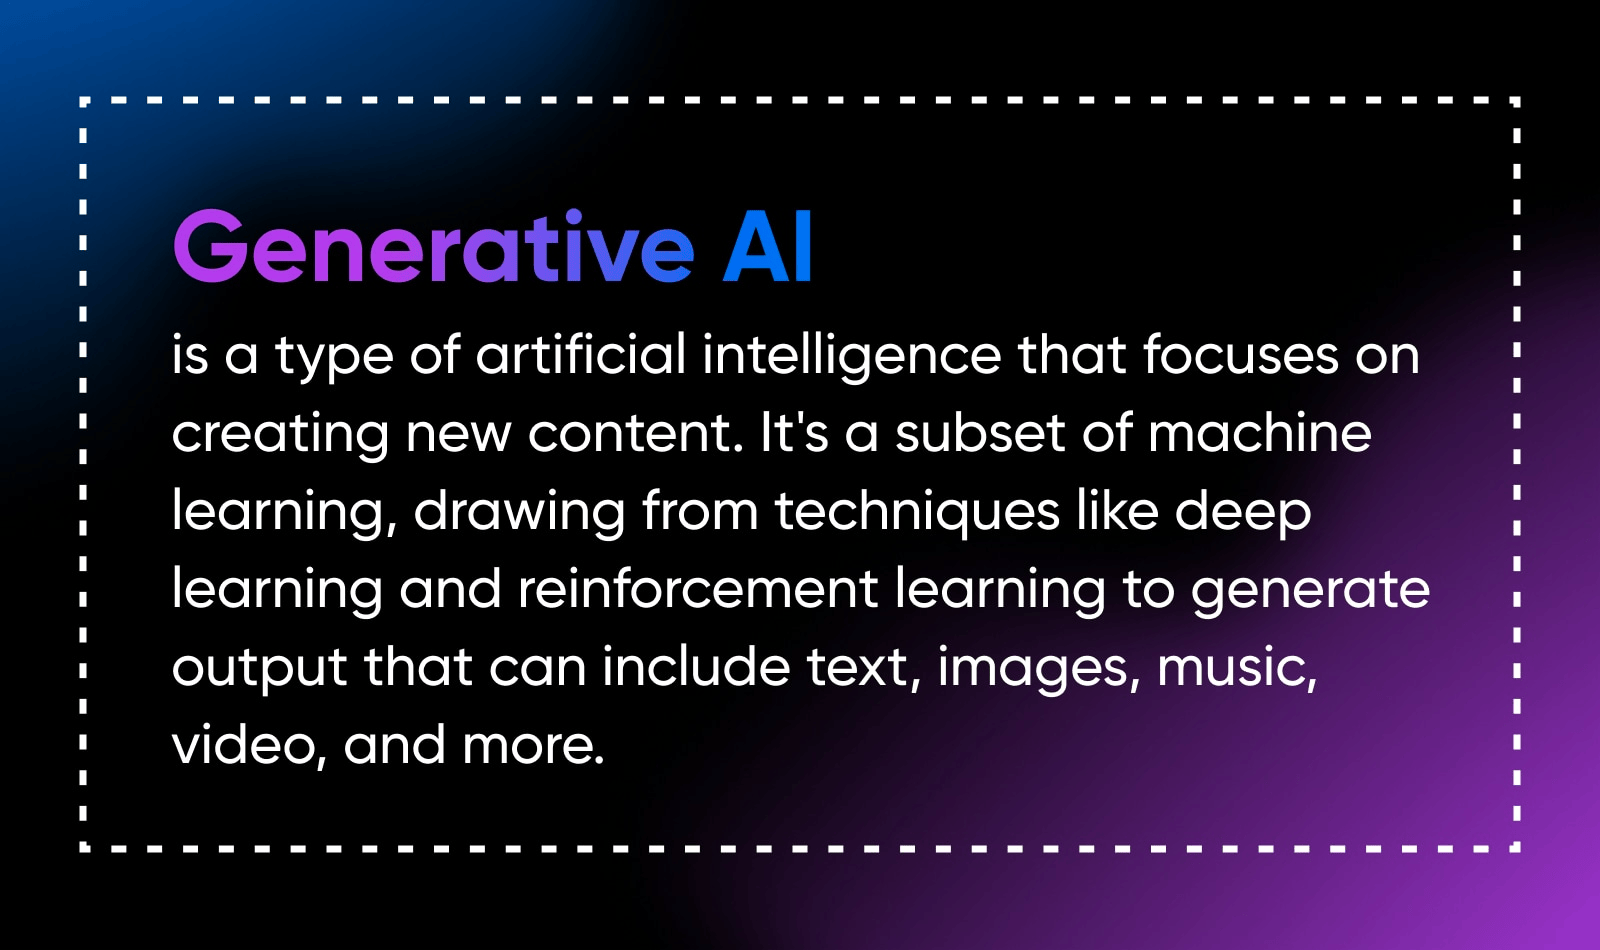 Generative AI is a type of artificial intelligence that focuses on creating new content. it's a subset of machine leanring, drawing from techniques like deep learning and reinforcement laerning to generate output that can include text, images, music, video, and more